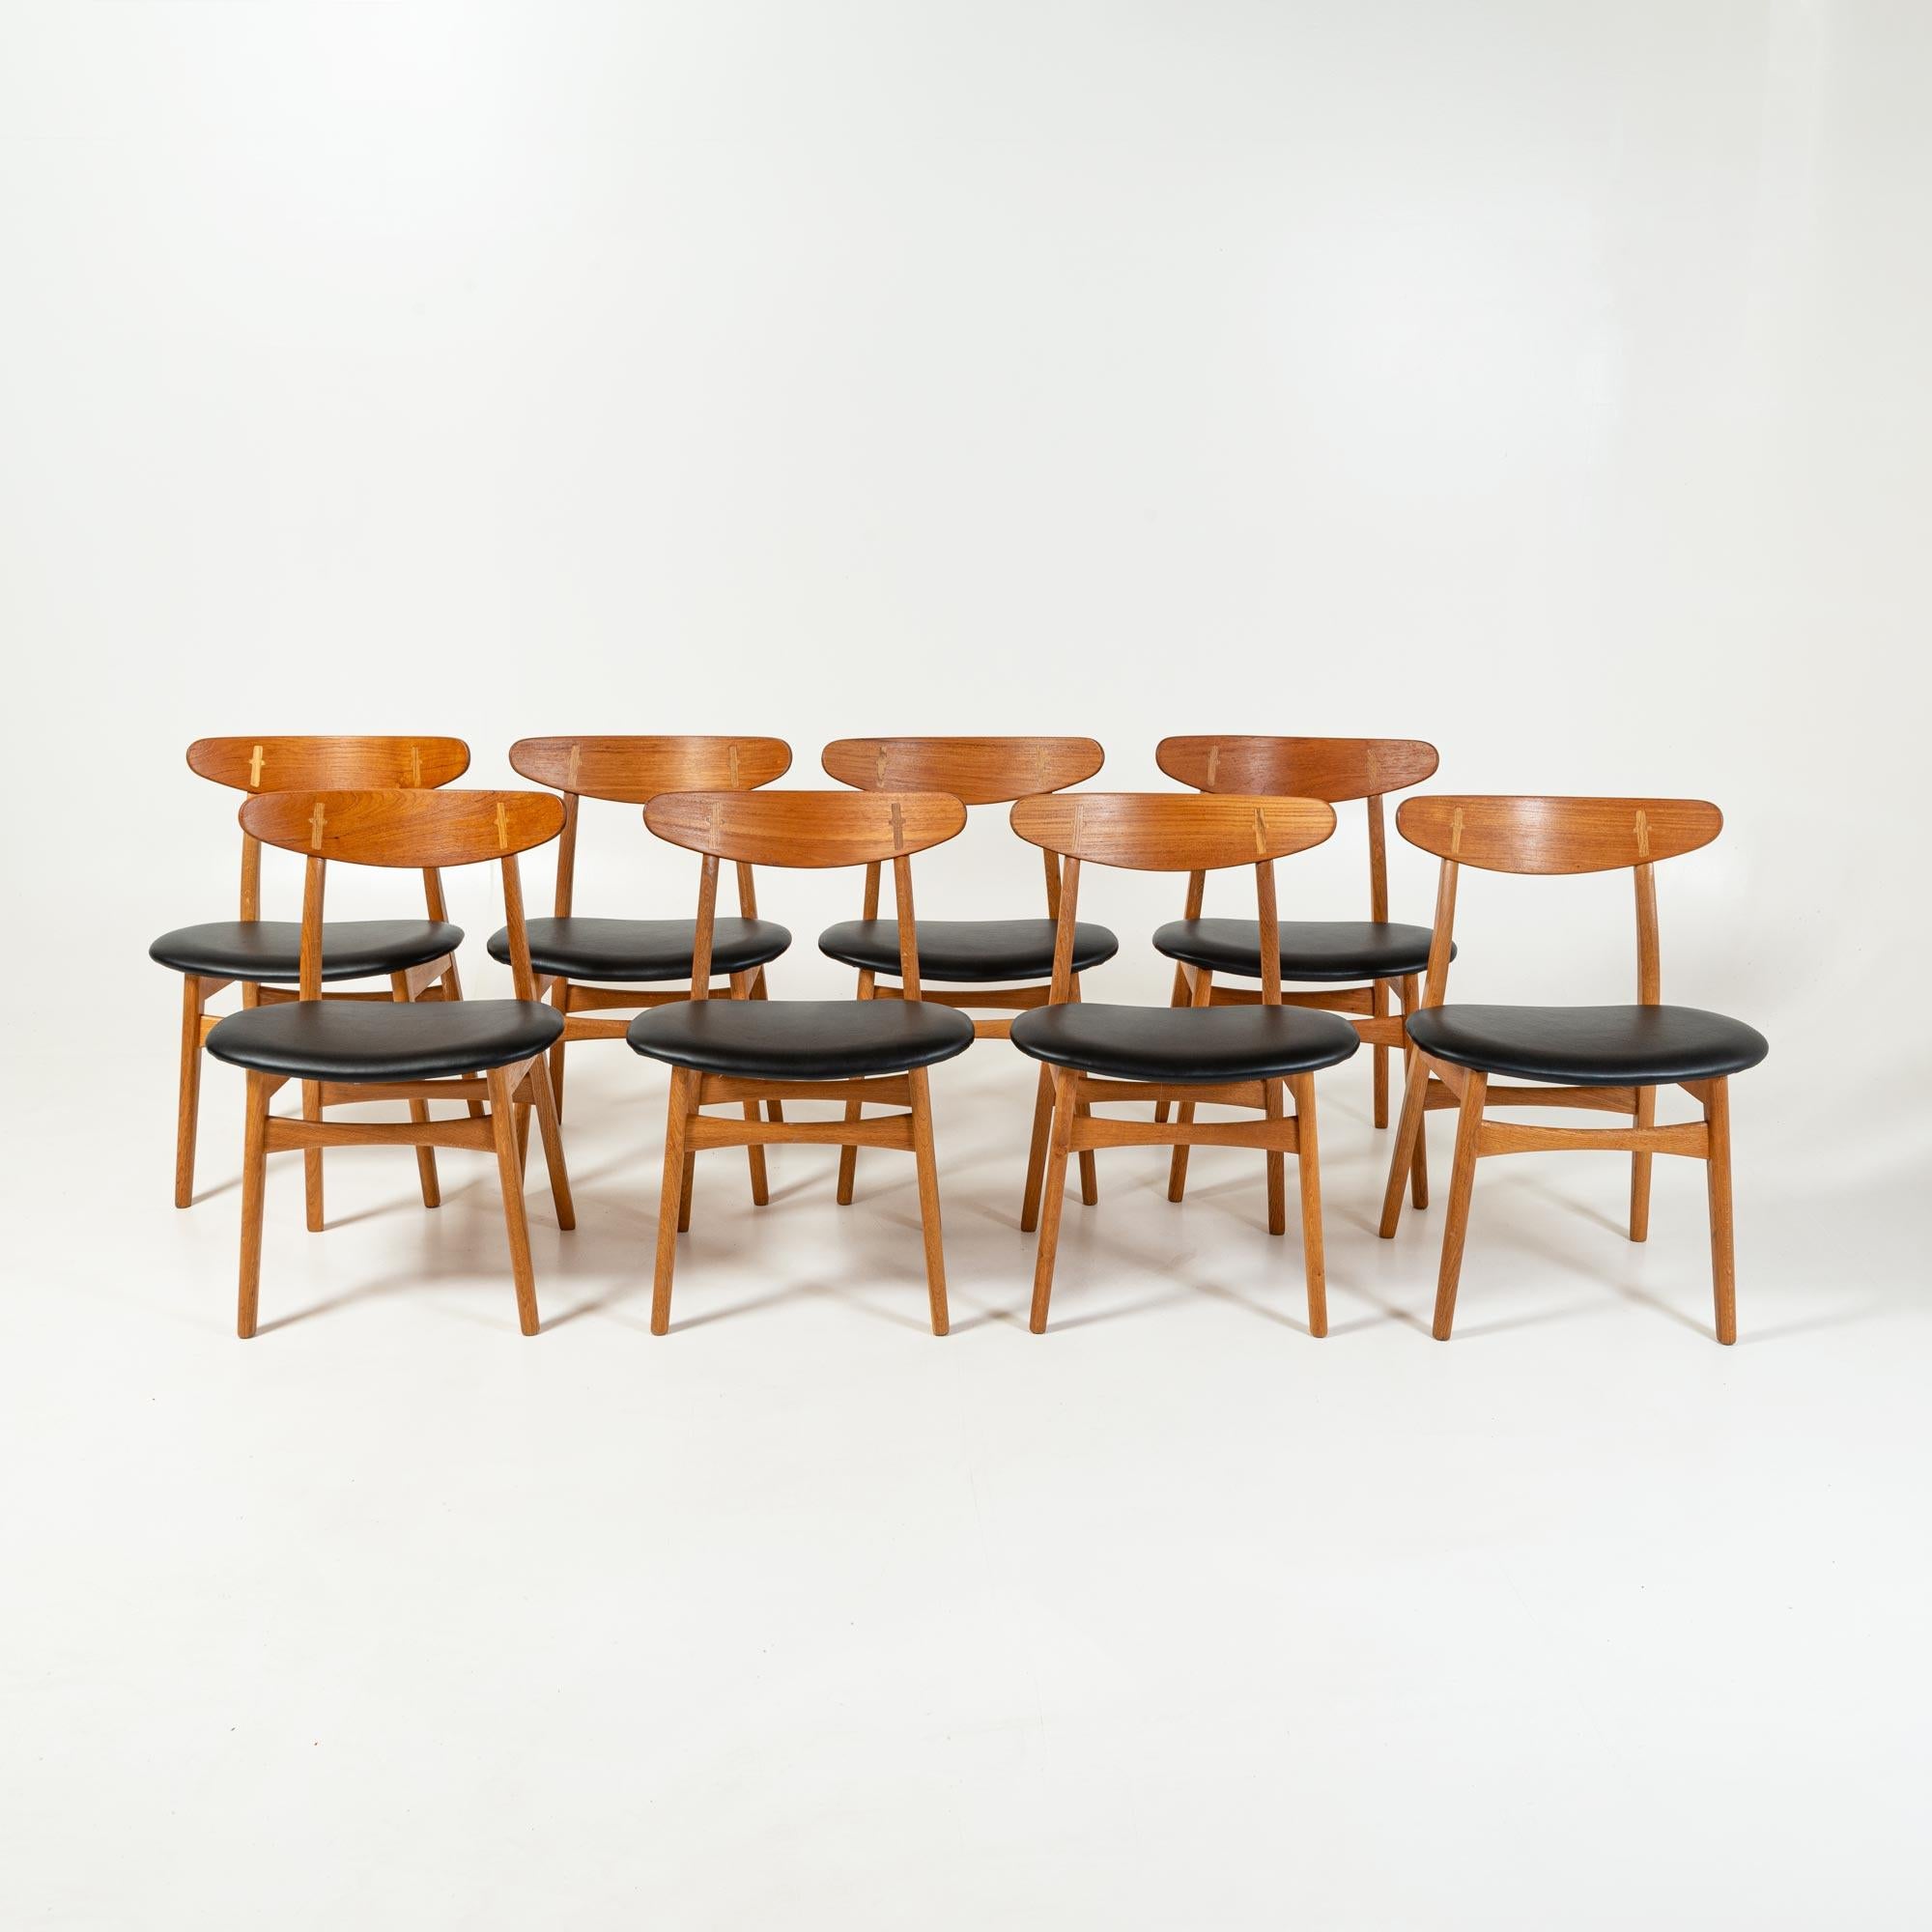 The CH30 is one of the first chairs Hans J. Wegner exclusively designed for Carl Hansen & Søn in 1950. This simplistic chair actually incorporates many sophisticated details, such as the cruciform cover caps in the backrest, a double-woven seat, and